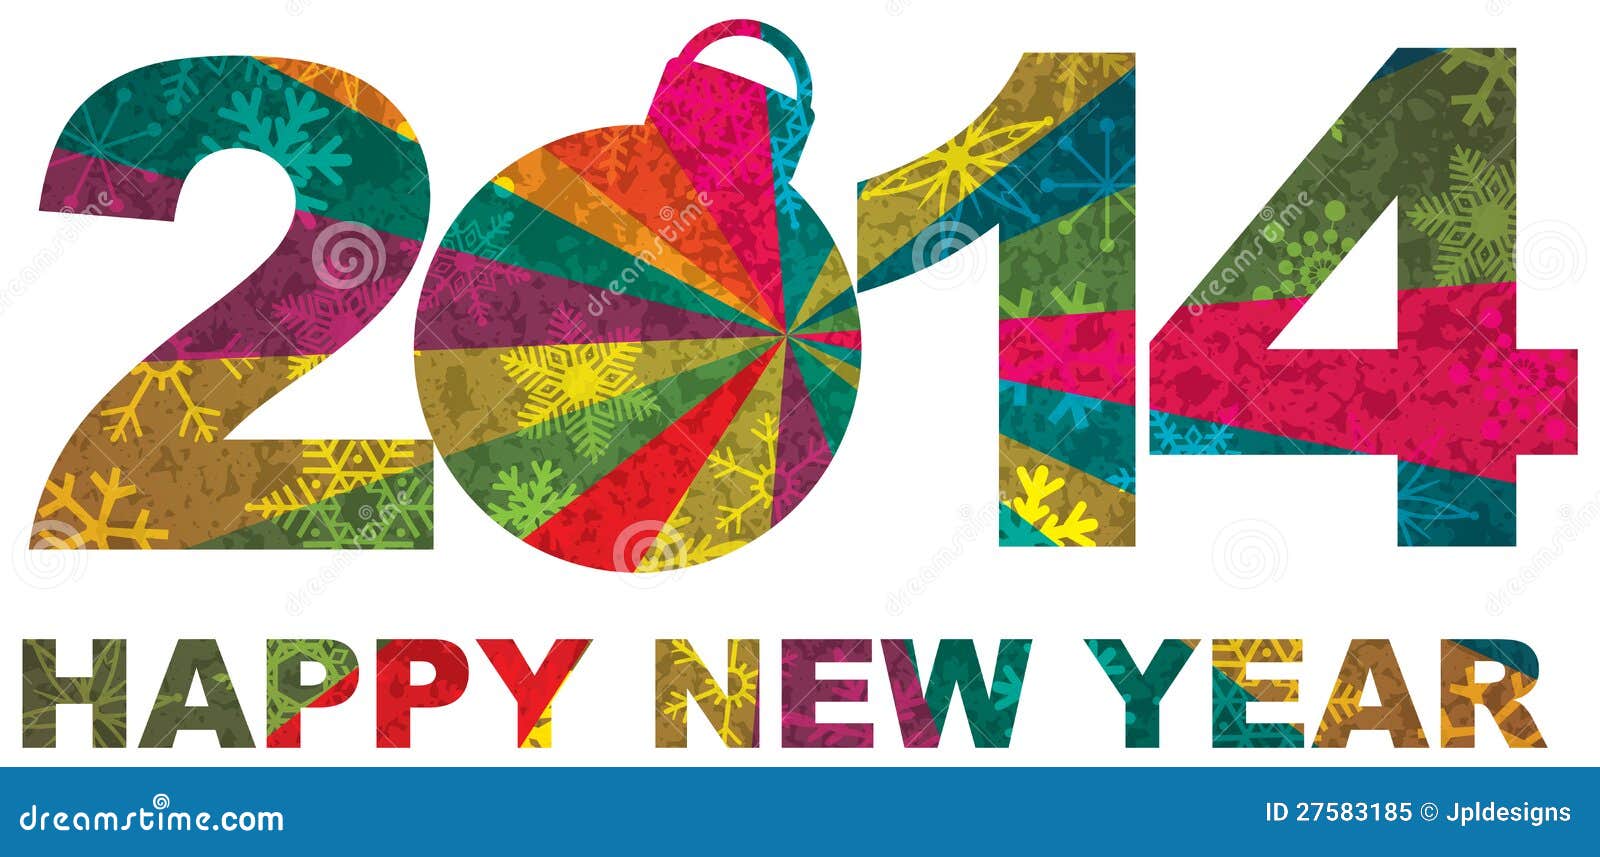 2014-happy-new-year-numerals-27583185